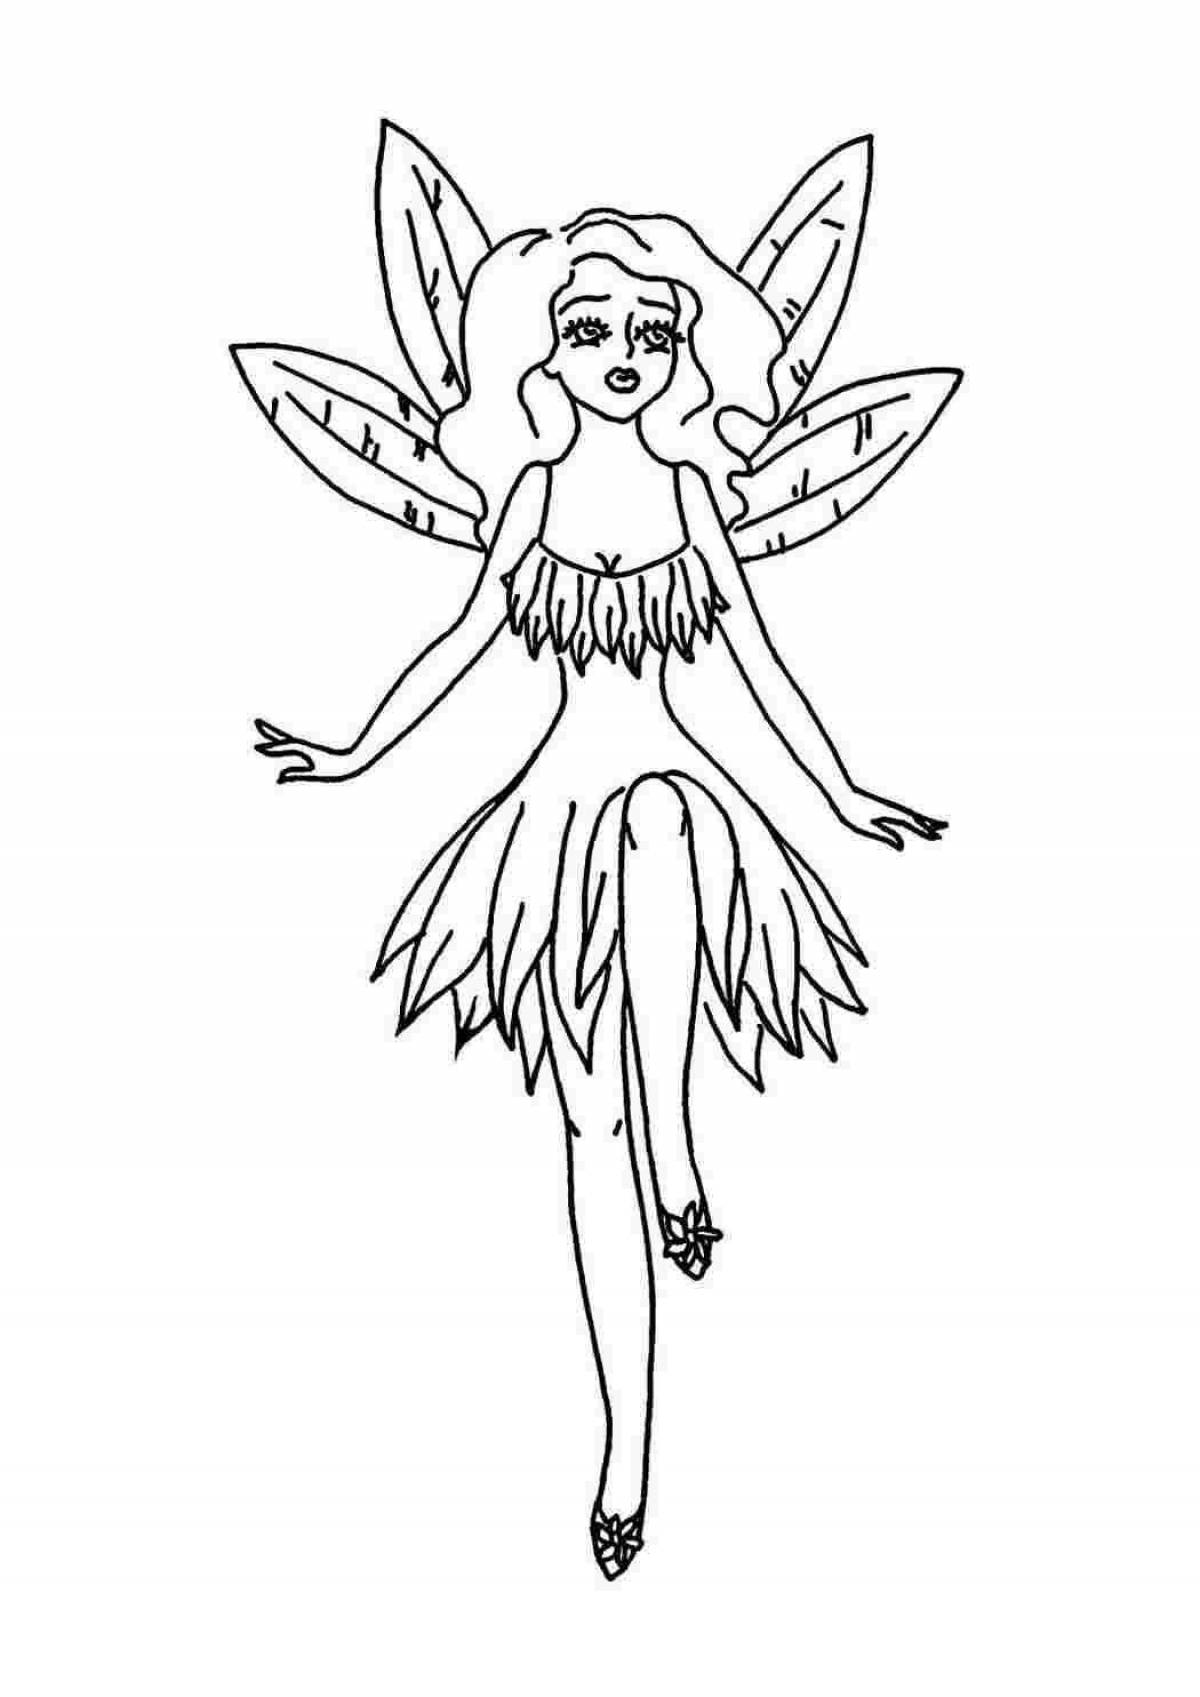 Incredible fairy coloring book with wings